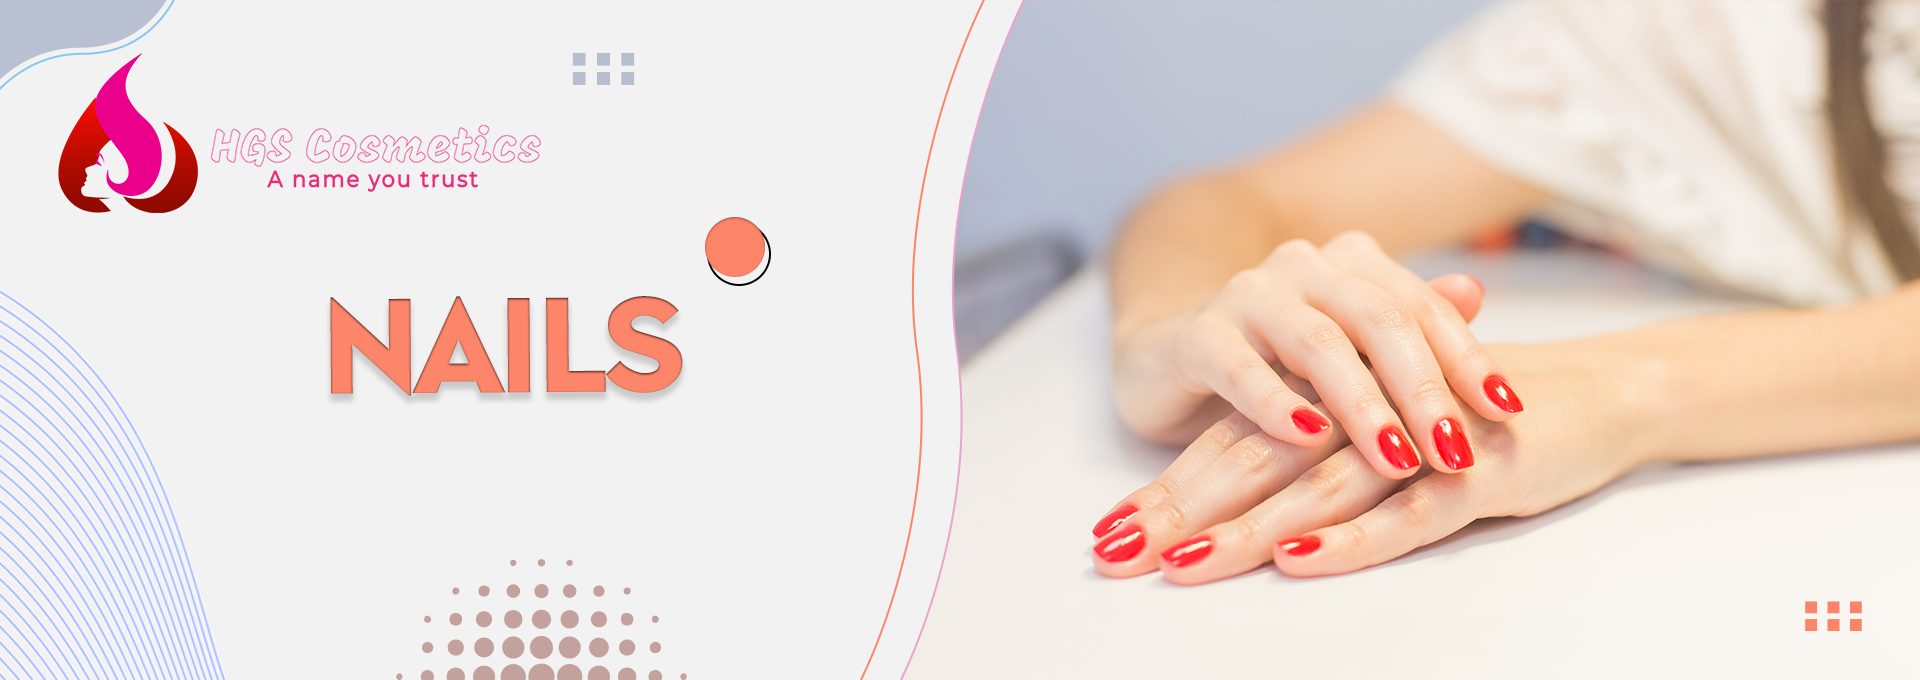 Shop Best Cosmetics Product For Nails products Online @ HGS Cosmetics